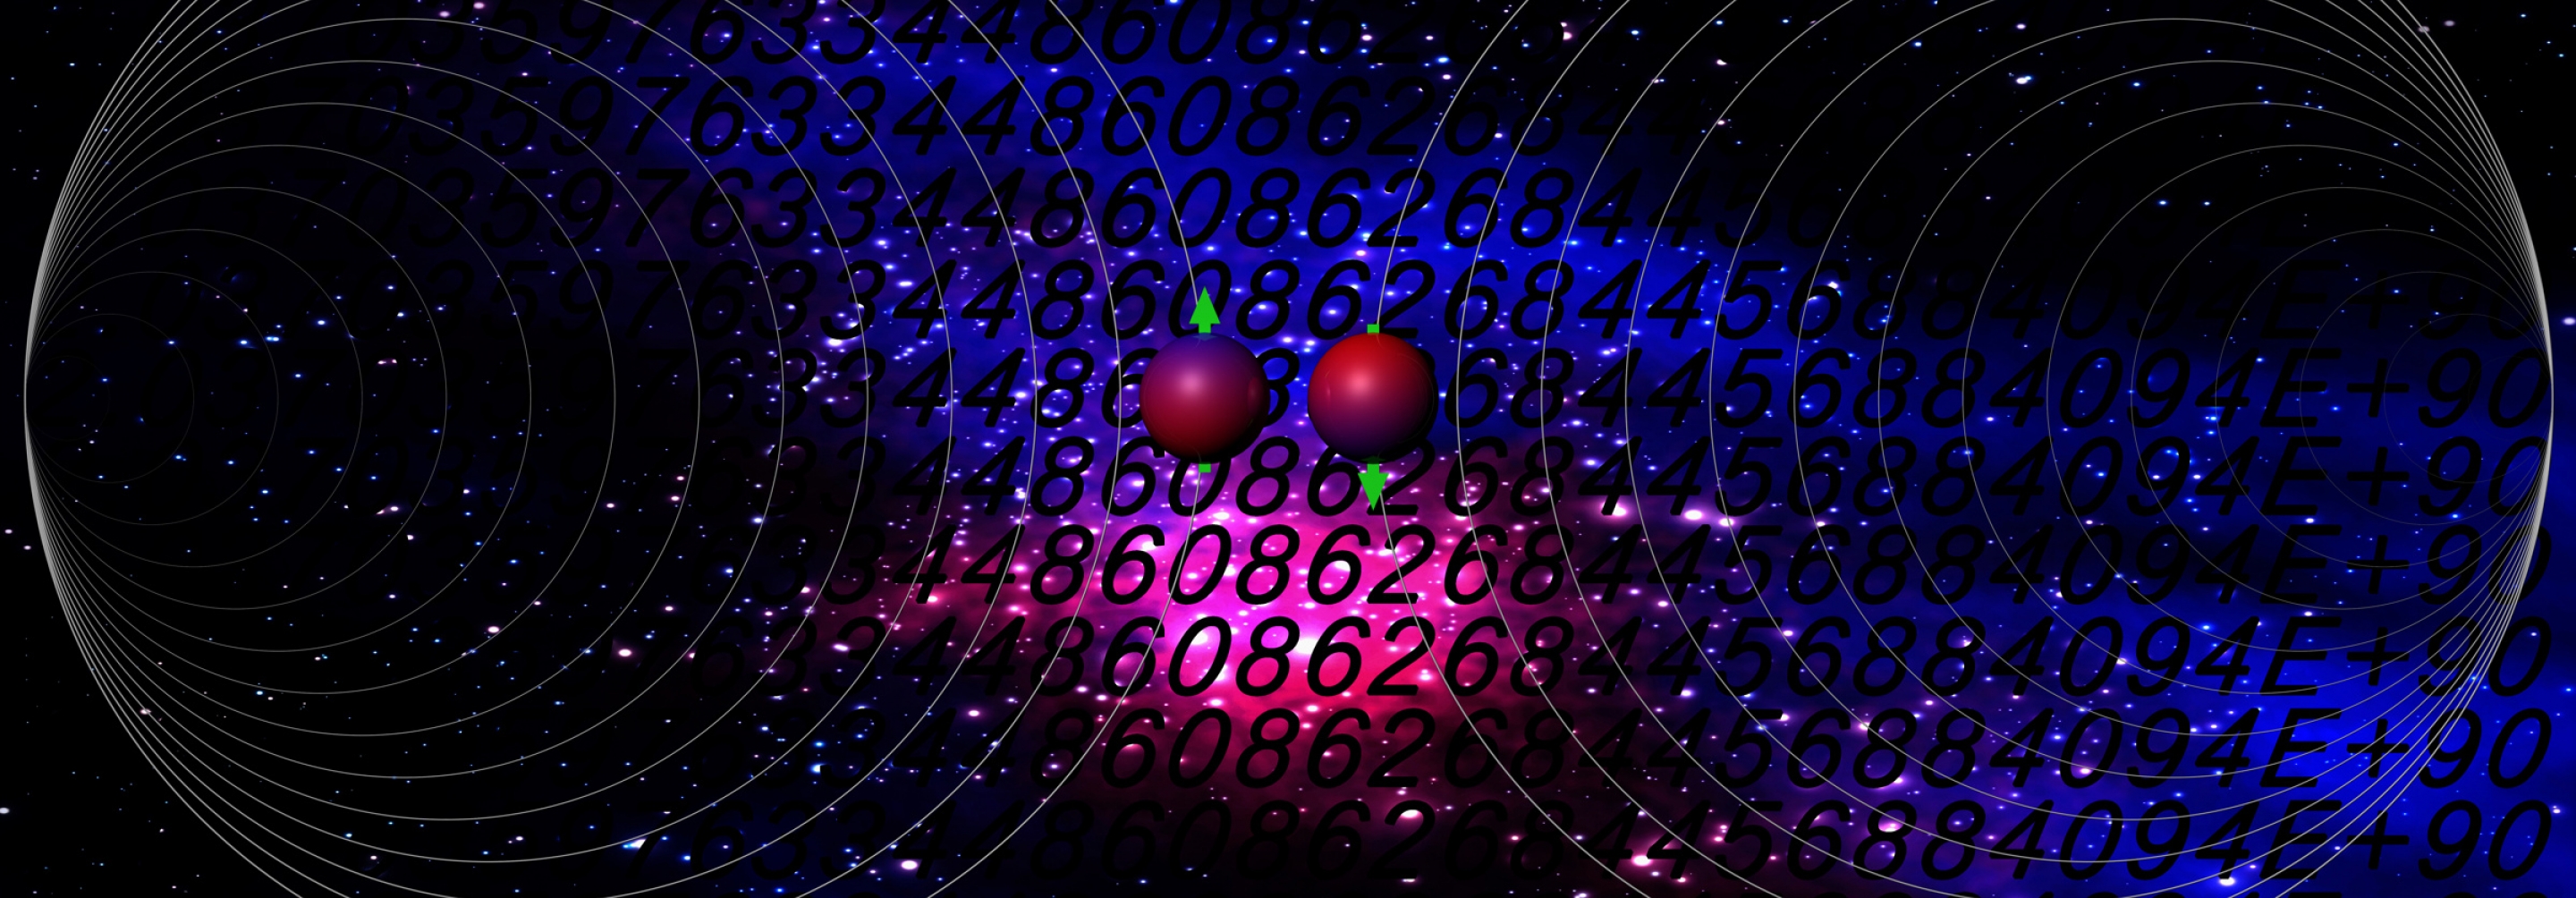 Two spheres on dark background with numbers and lines